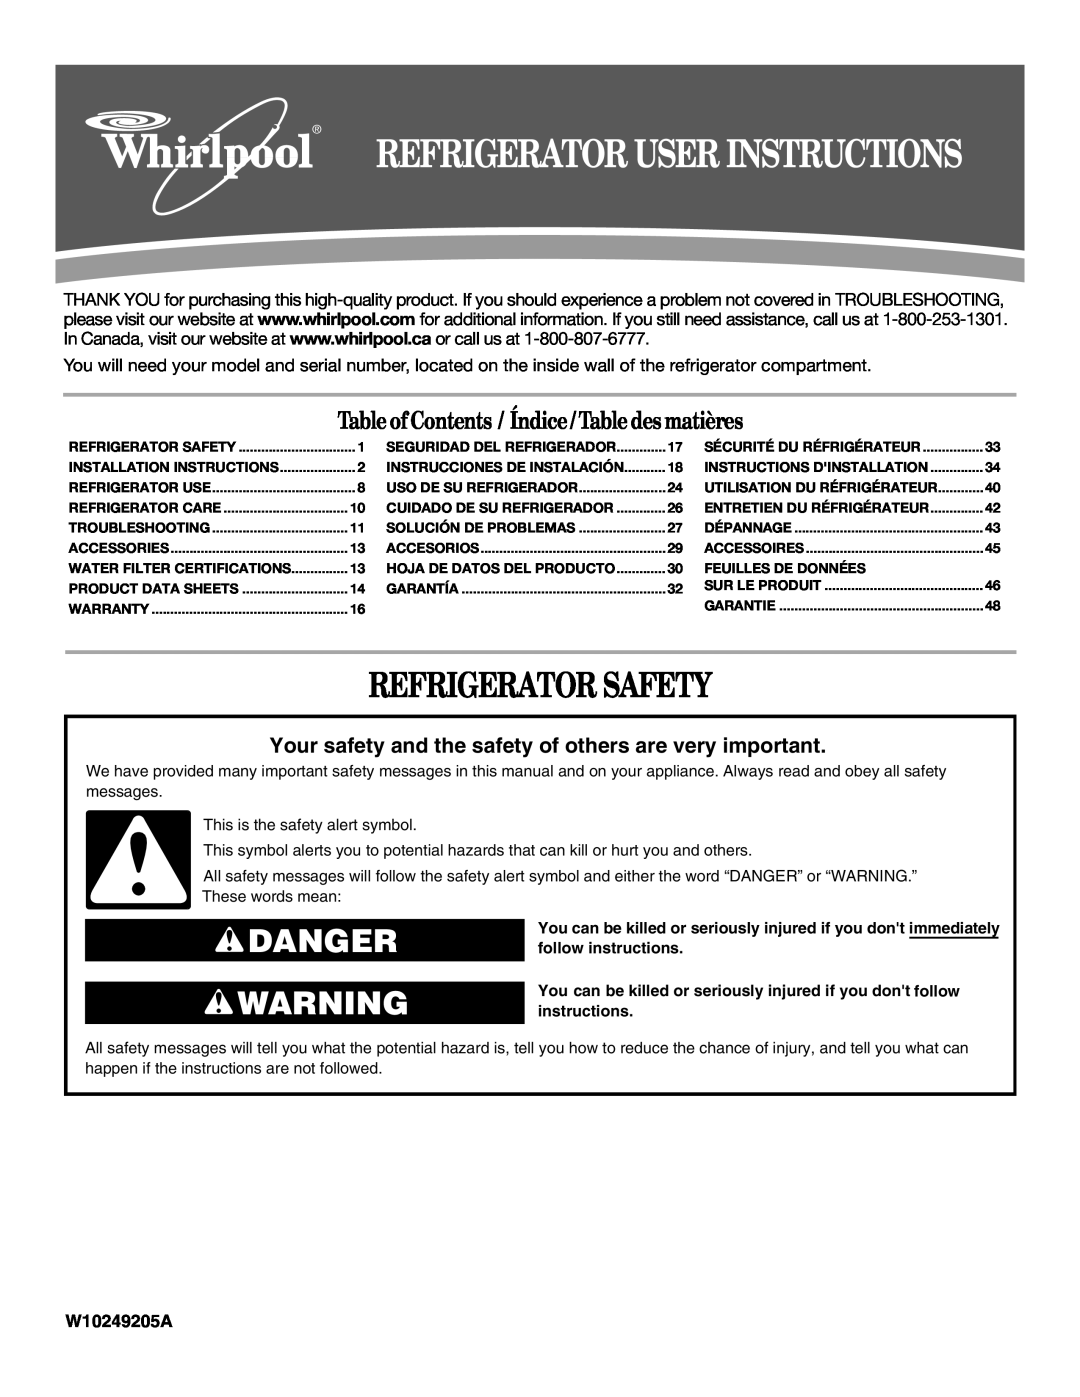 Whirlpool W10249205A installation instructions Refrigerator Safety, Danger, Table ofContents / Índice / Table des matières 